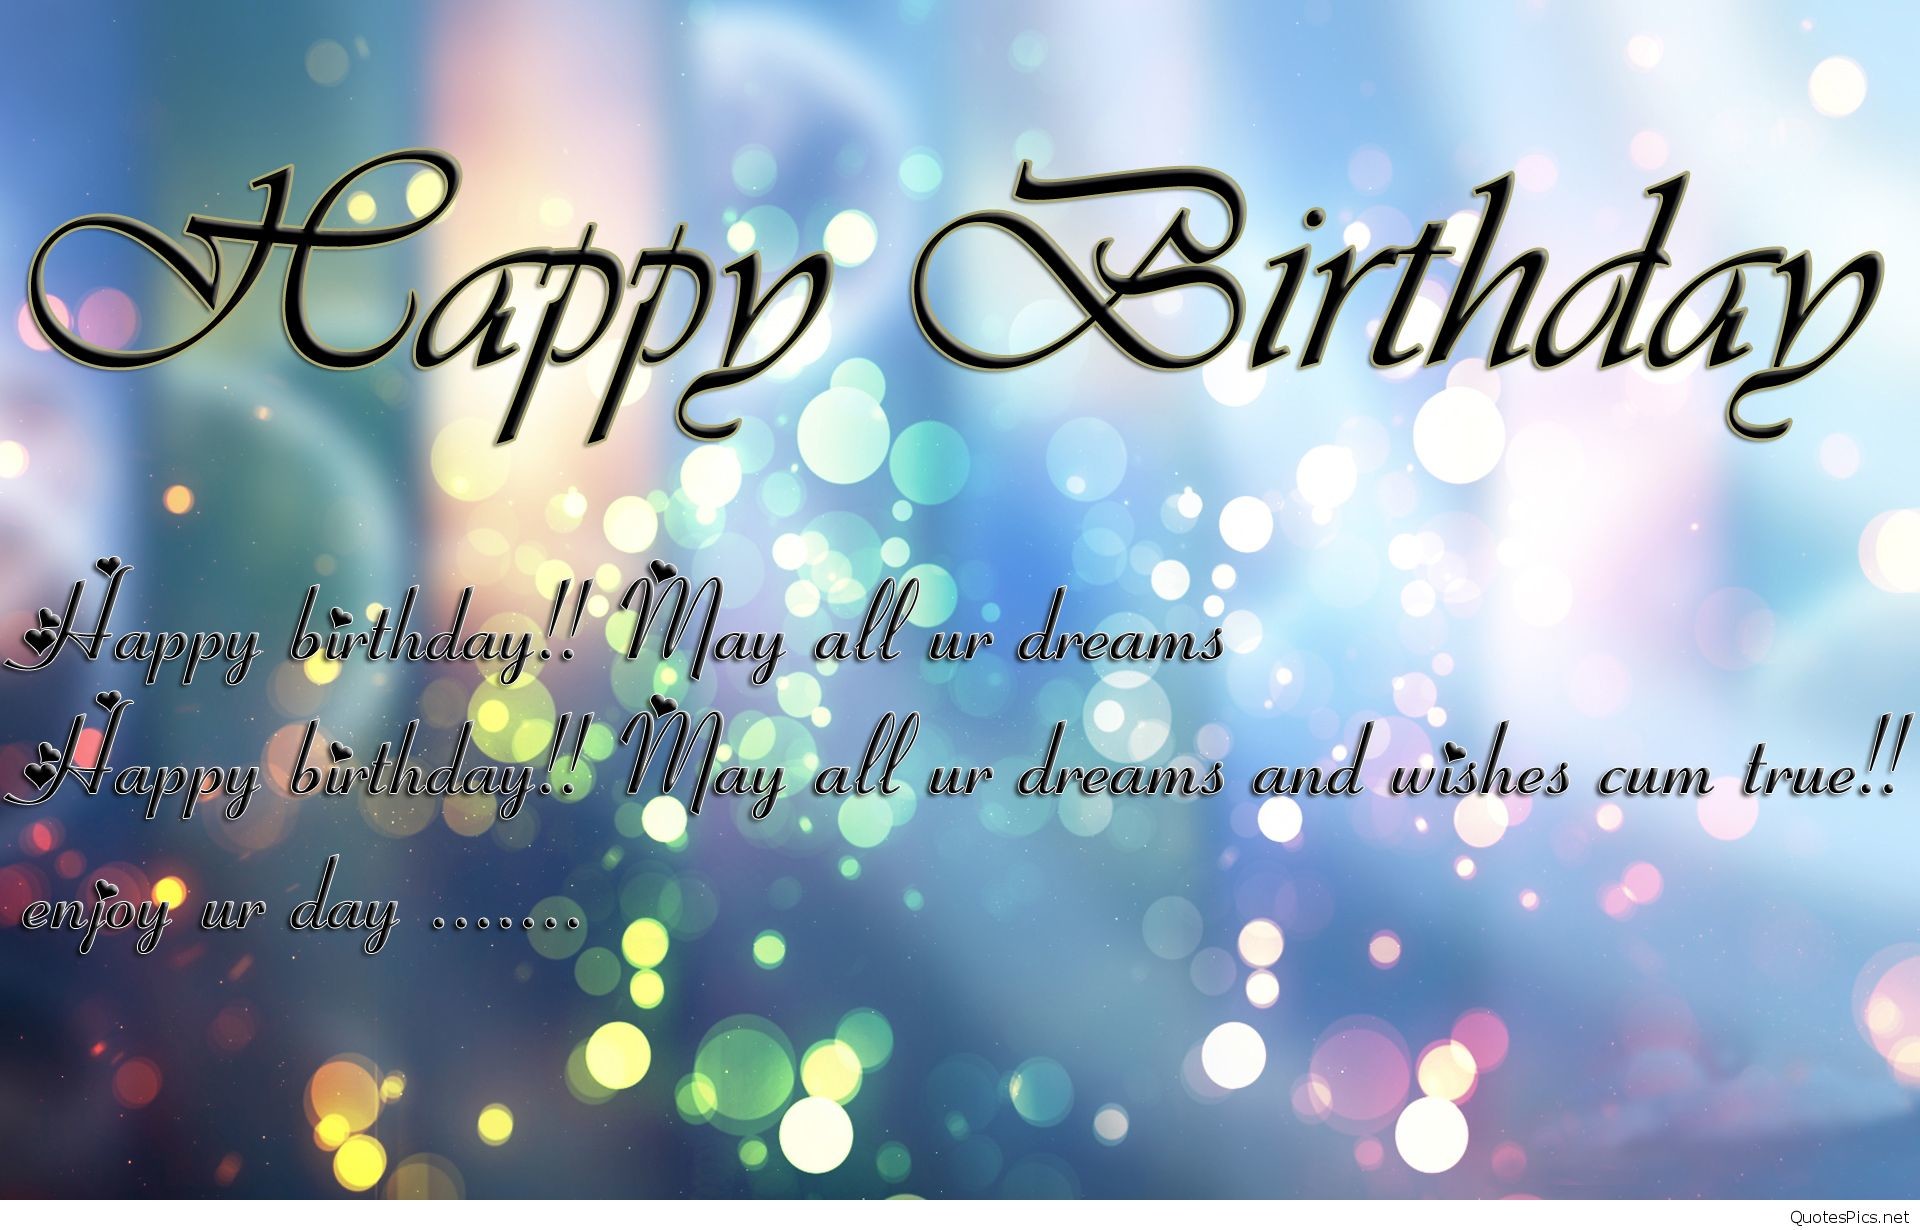 Lovely Birthday Quote Hd Wallpaper Of Top Quality - Best Birthday Images Hd  - 1916x1123 Wallpaper 